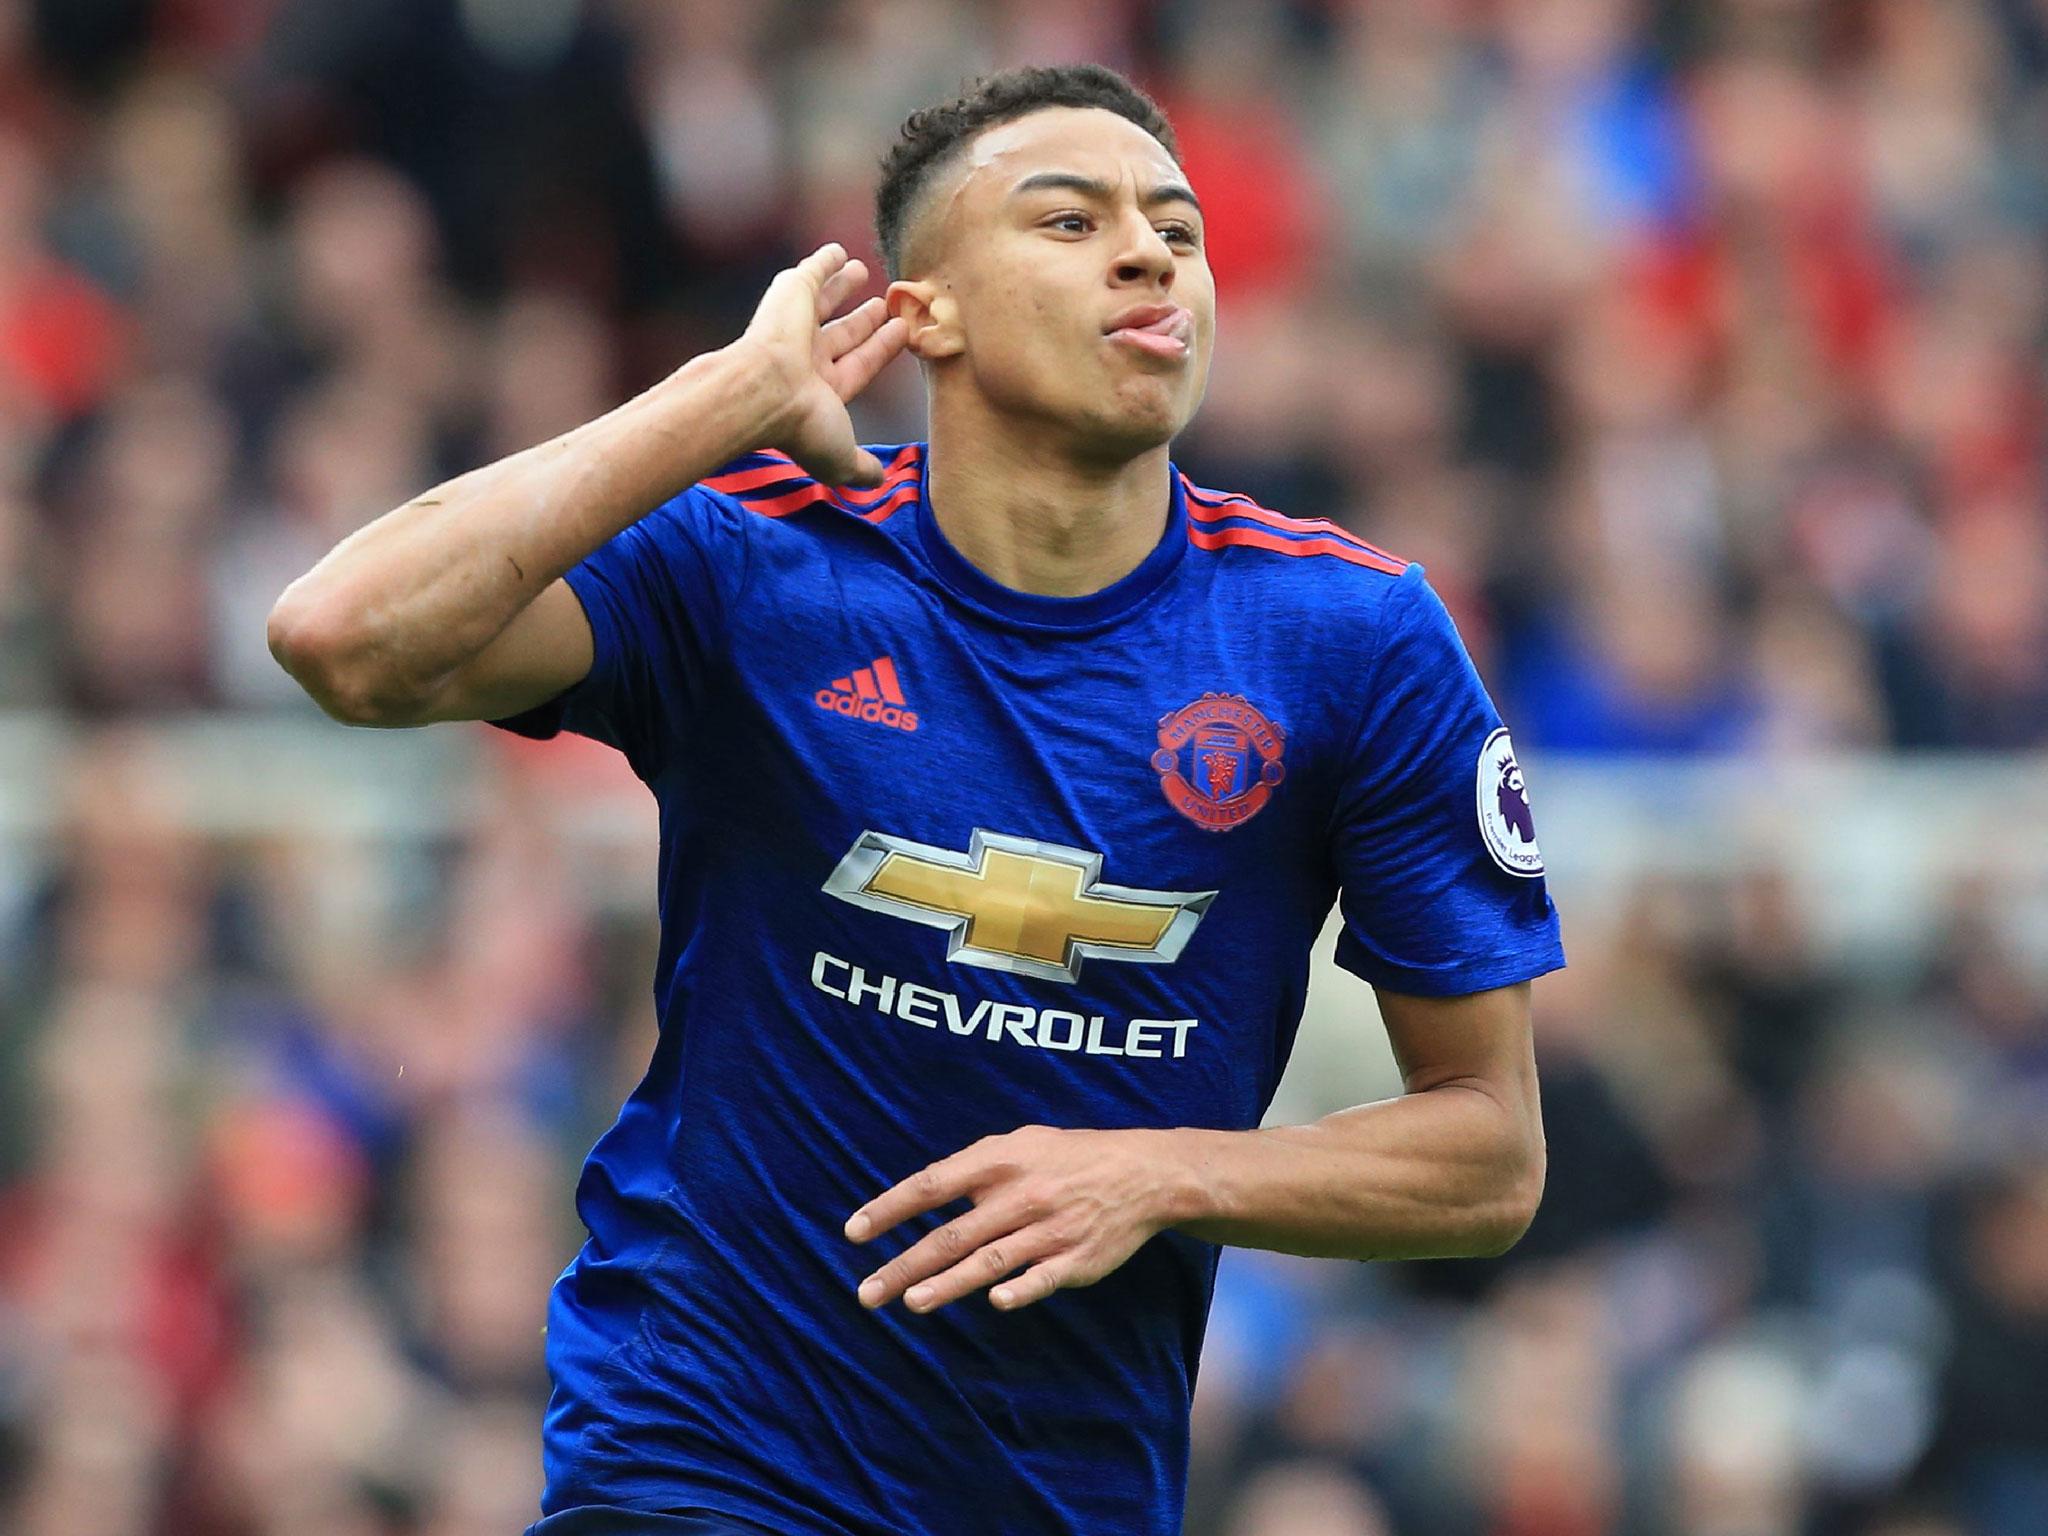 Jesse Lingard struck a fine second-half goal as United cruised to a win